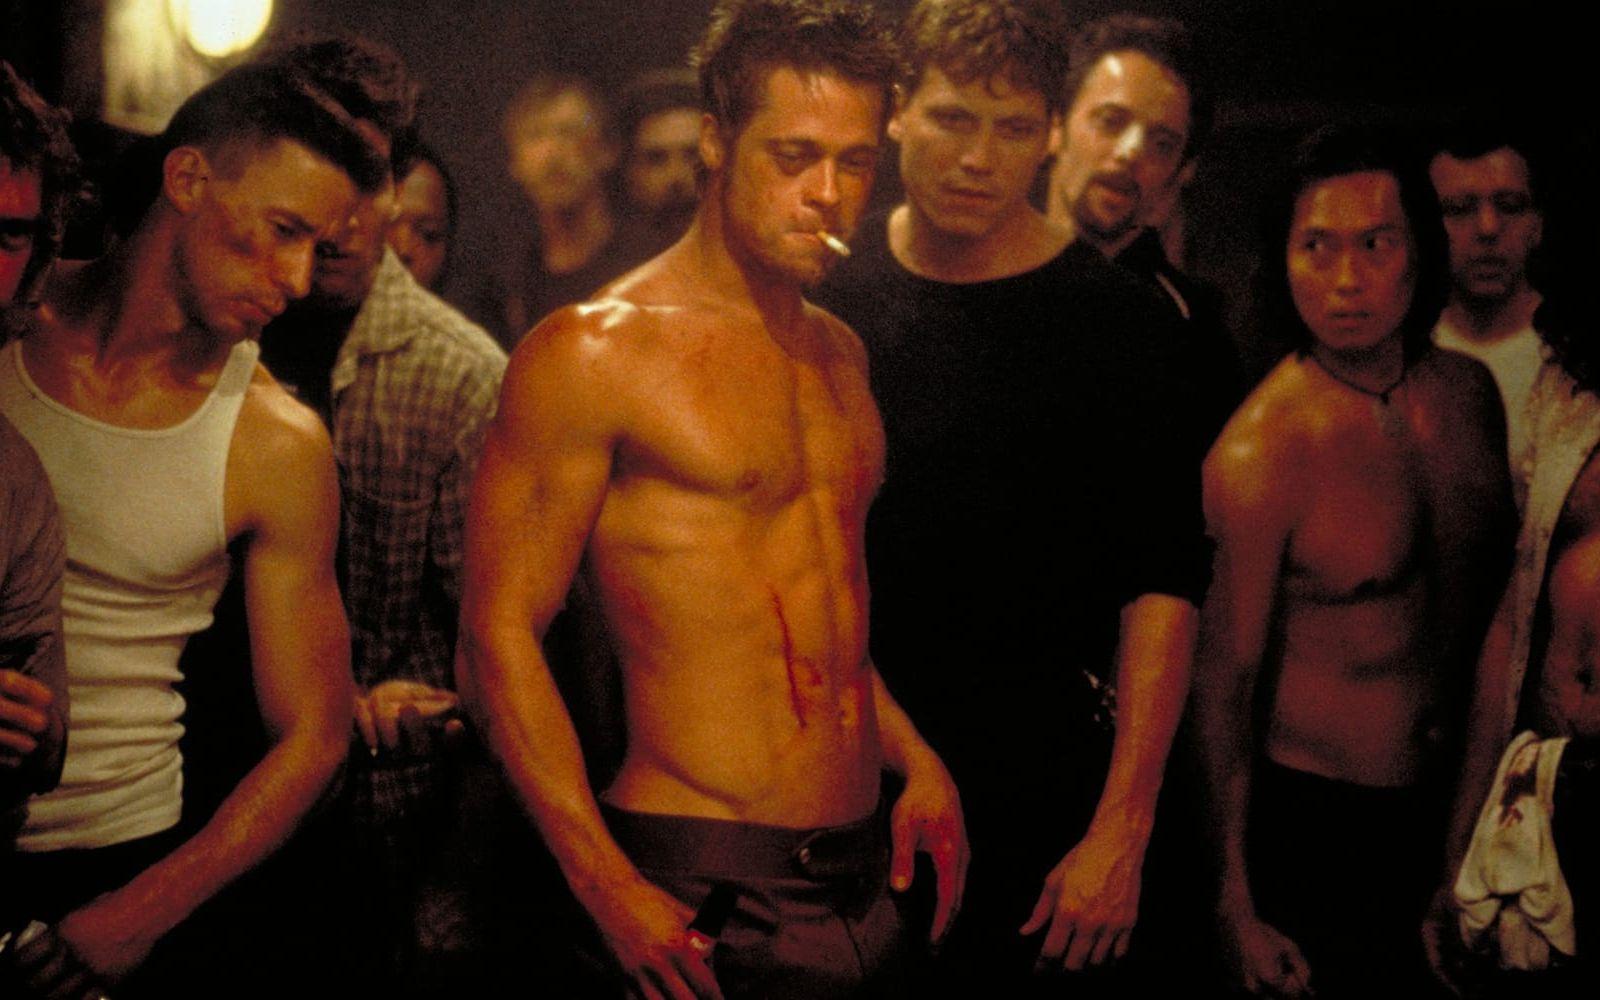 "The first rule of Fight Club is: You do not talk about Fight Club." – Brad Pitt som Tyler Durden i Fight club, 1999